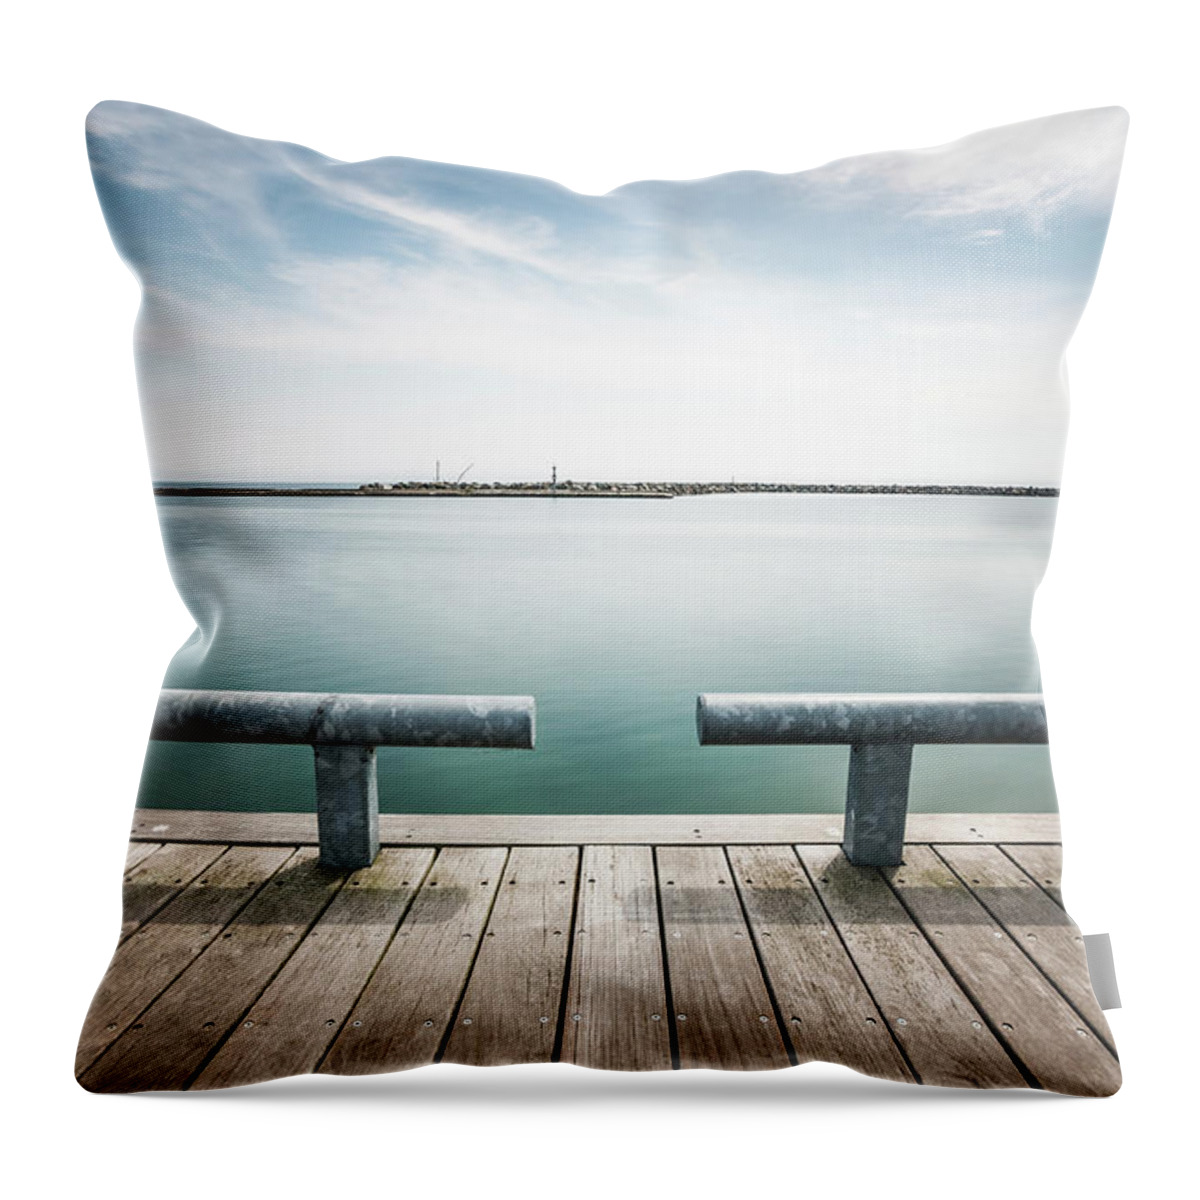 Scenics Throw Pillow featuring the photograph Torontos Lakeside by Www.piotrhalka.com